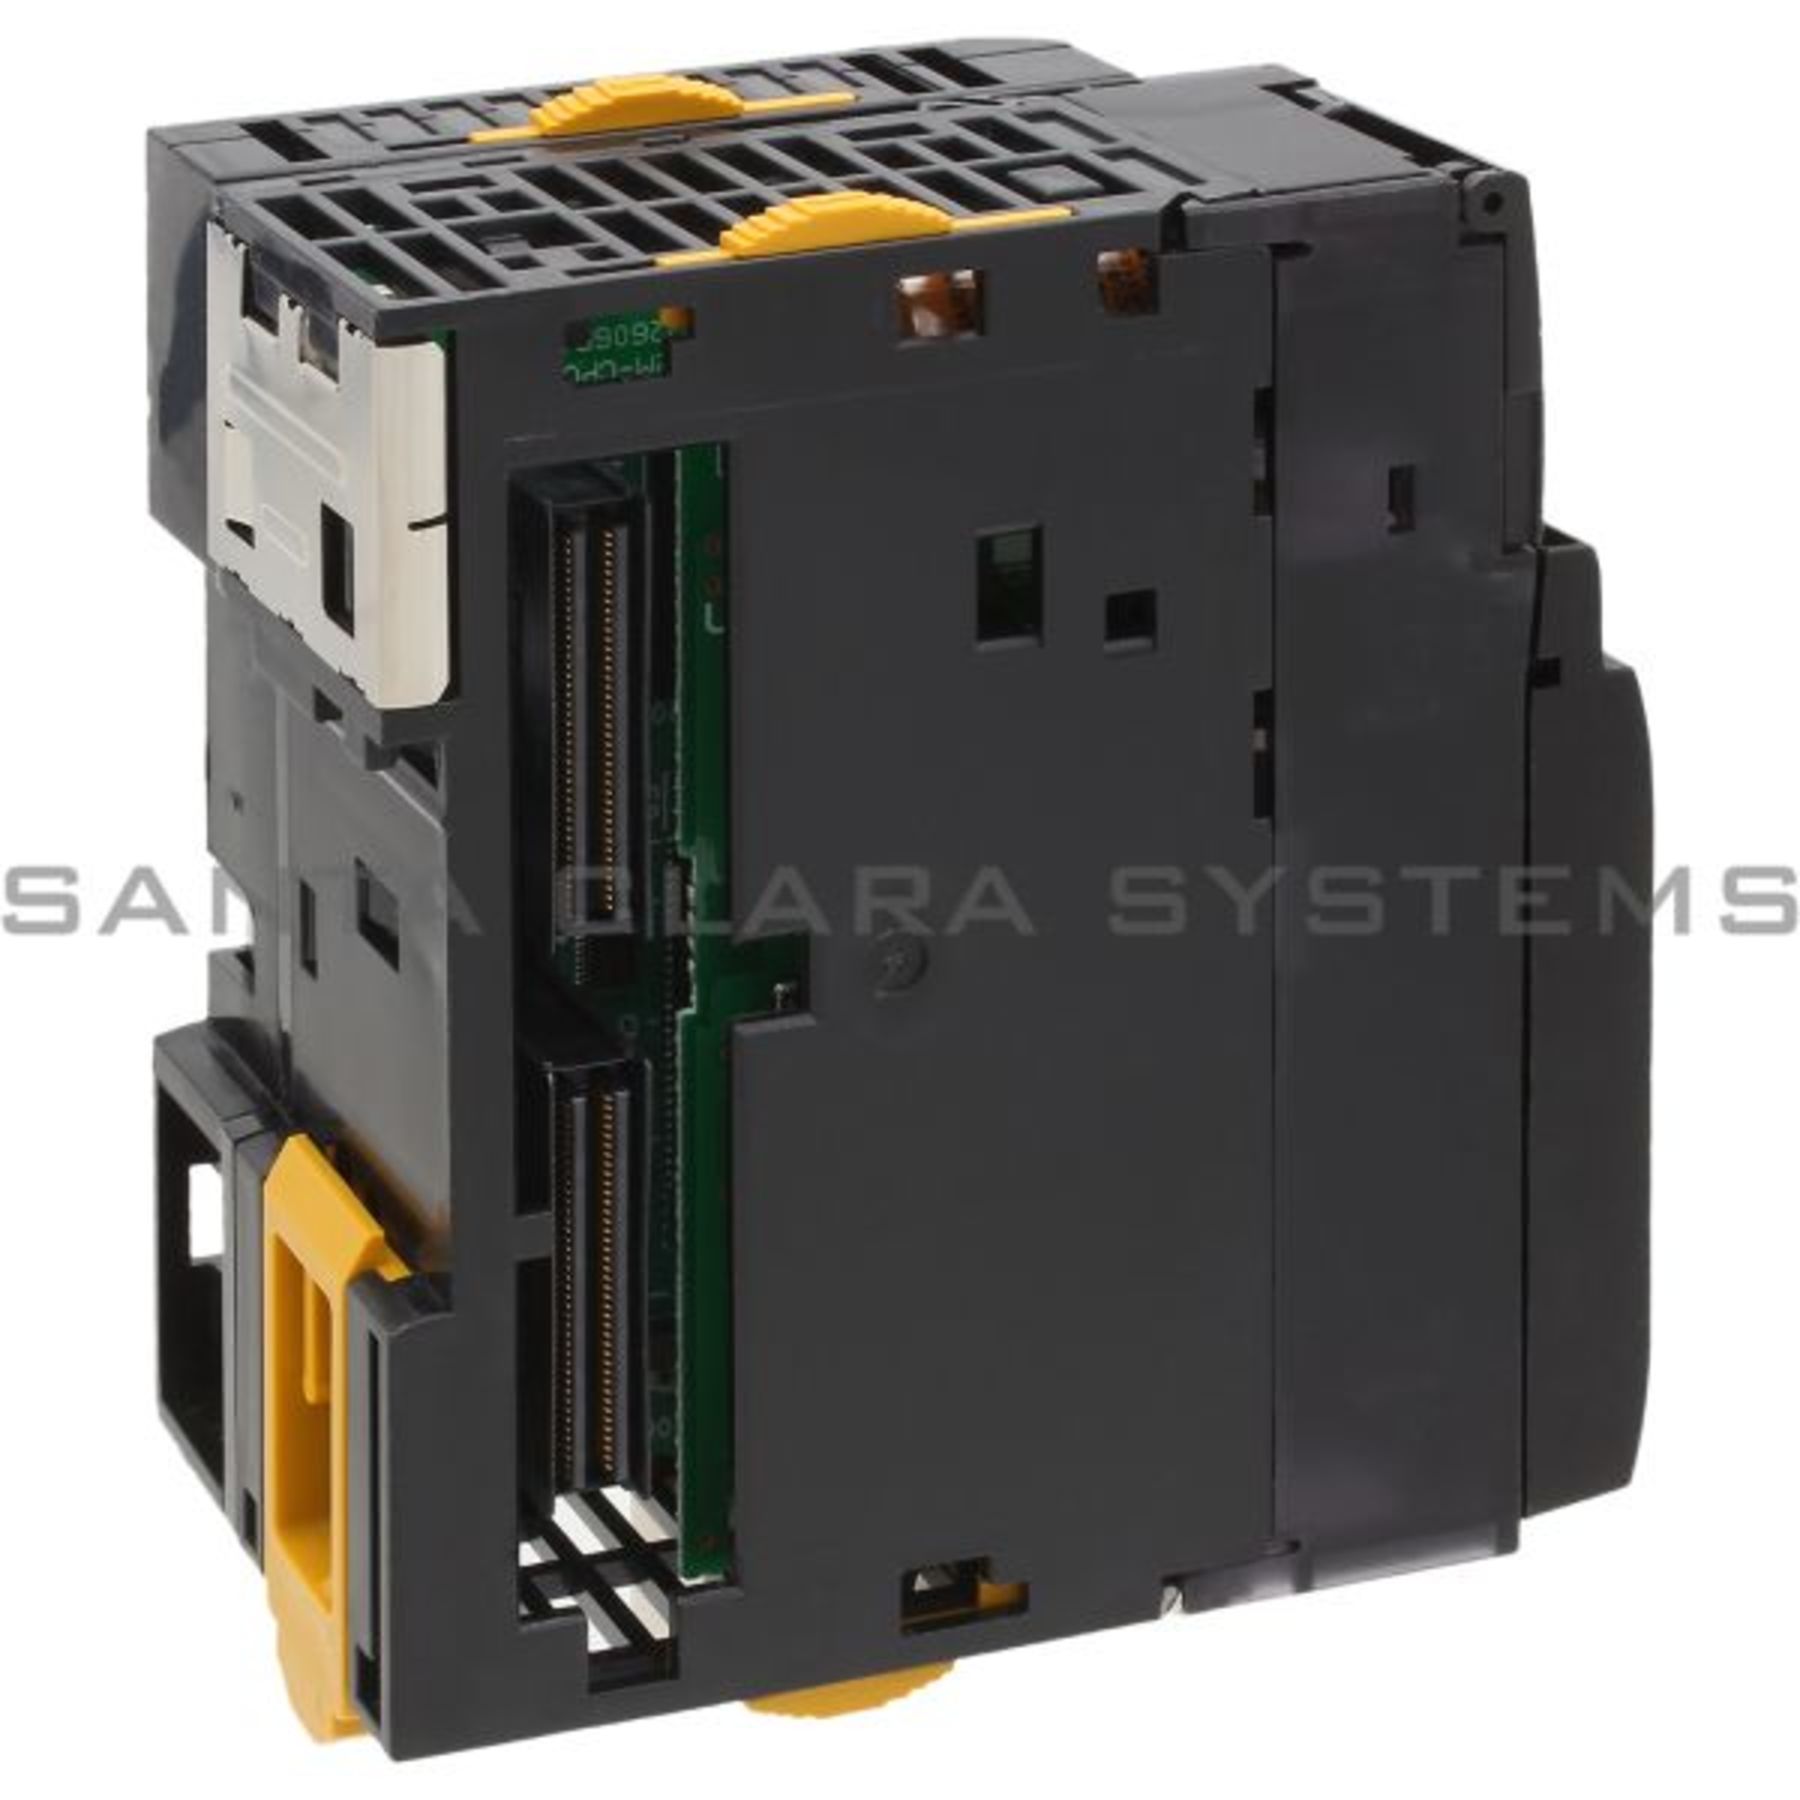 CJ2M-CPU13 Omron In stock and ready to ship - Santa Clara Systems